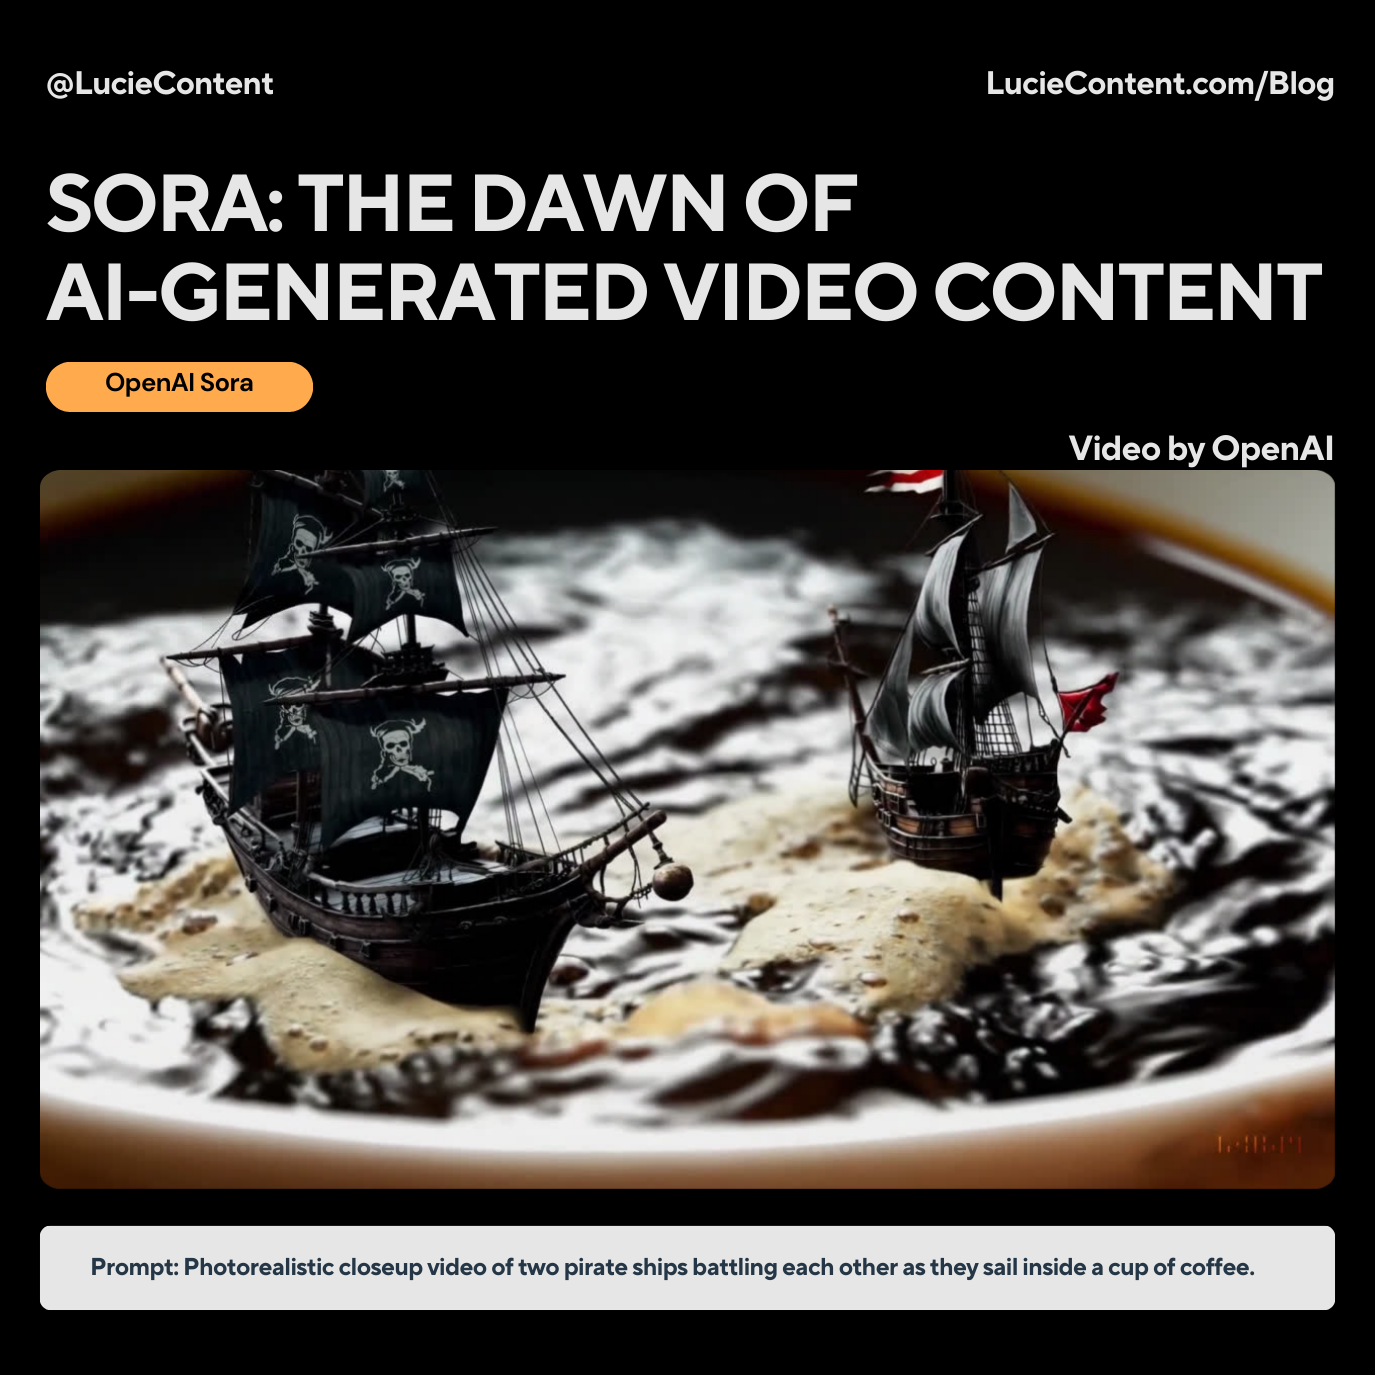 Copy of Sora The Dawn of AI-Generated Video Content (600 x 600 px) (1).png